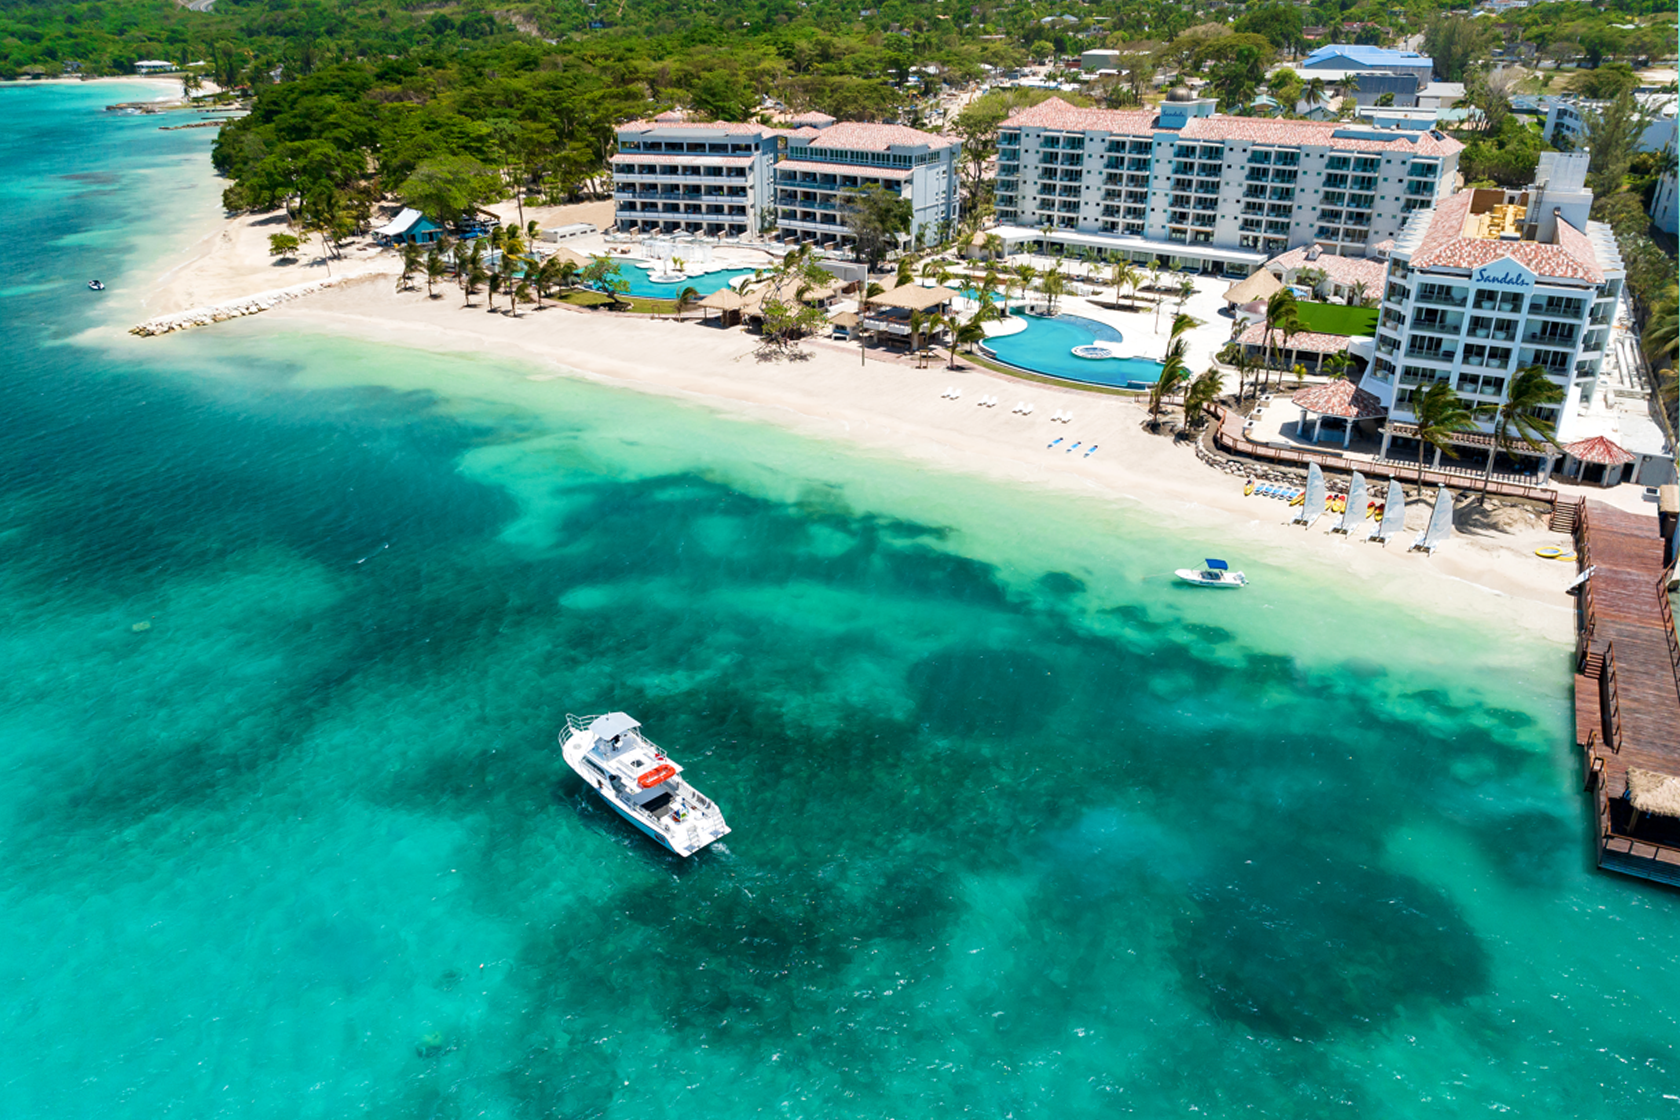 Sandals Elevates Food And Beverage Lineup As It Expands Footprint